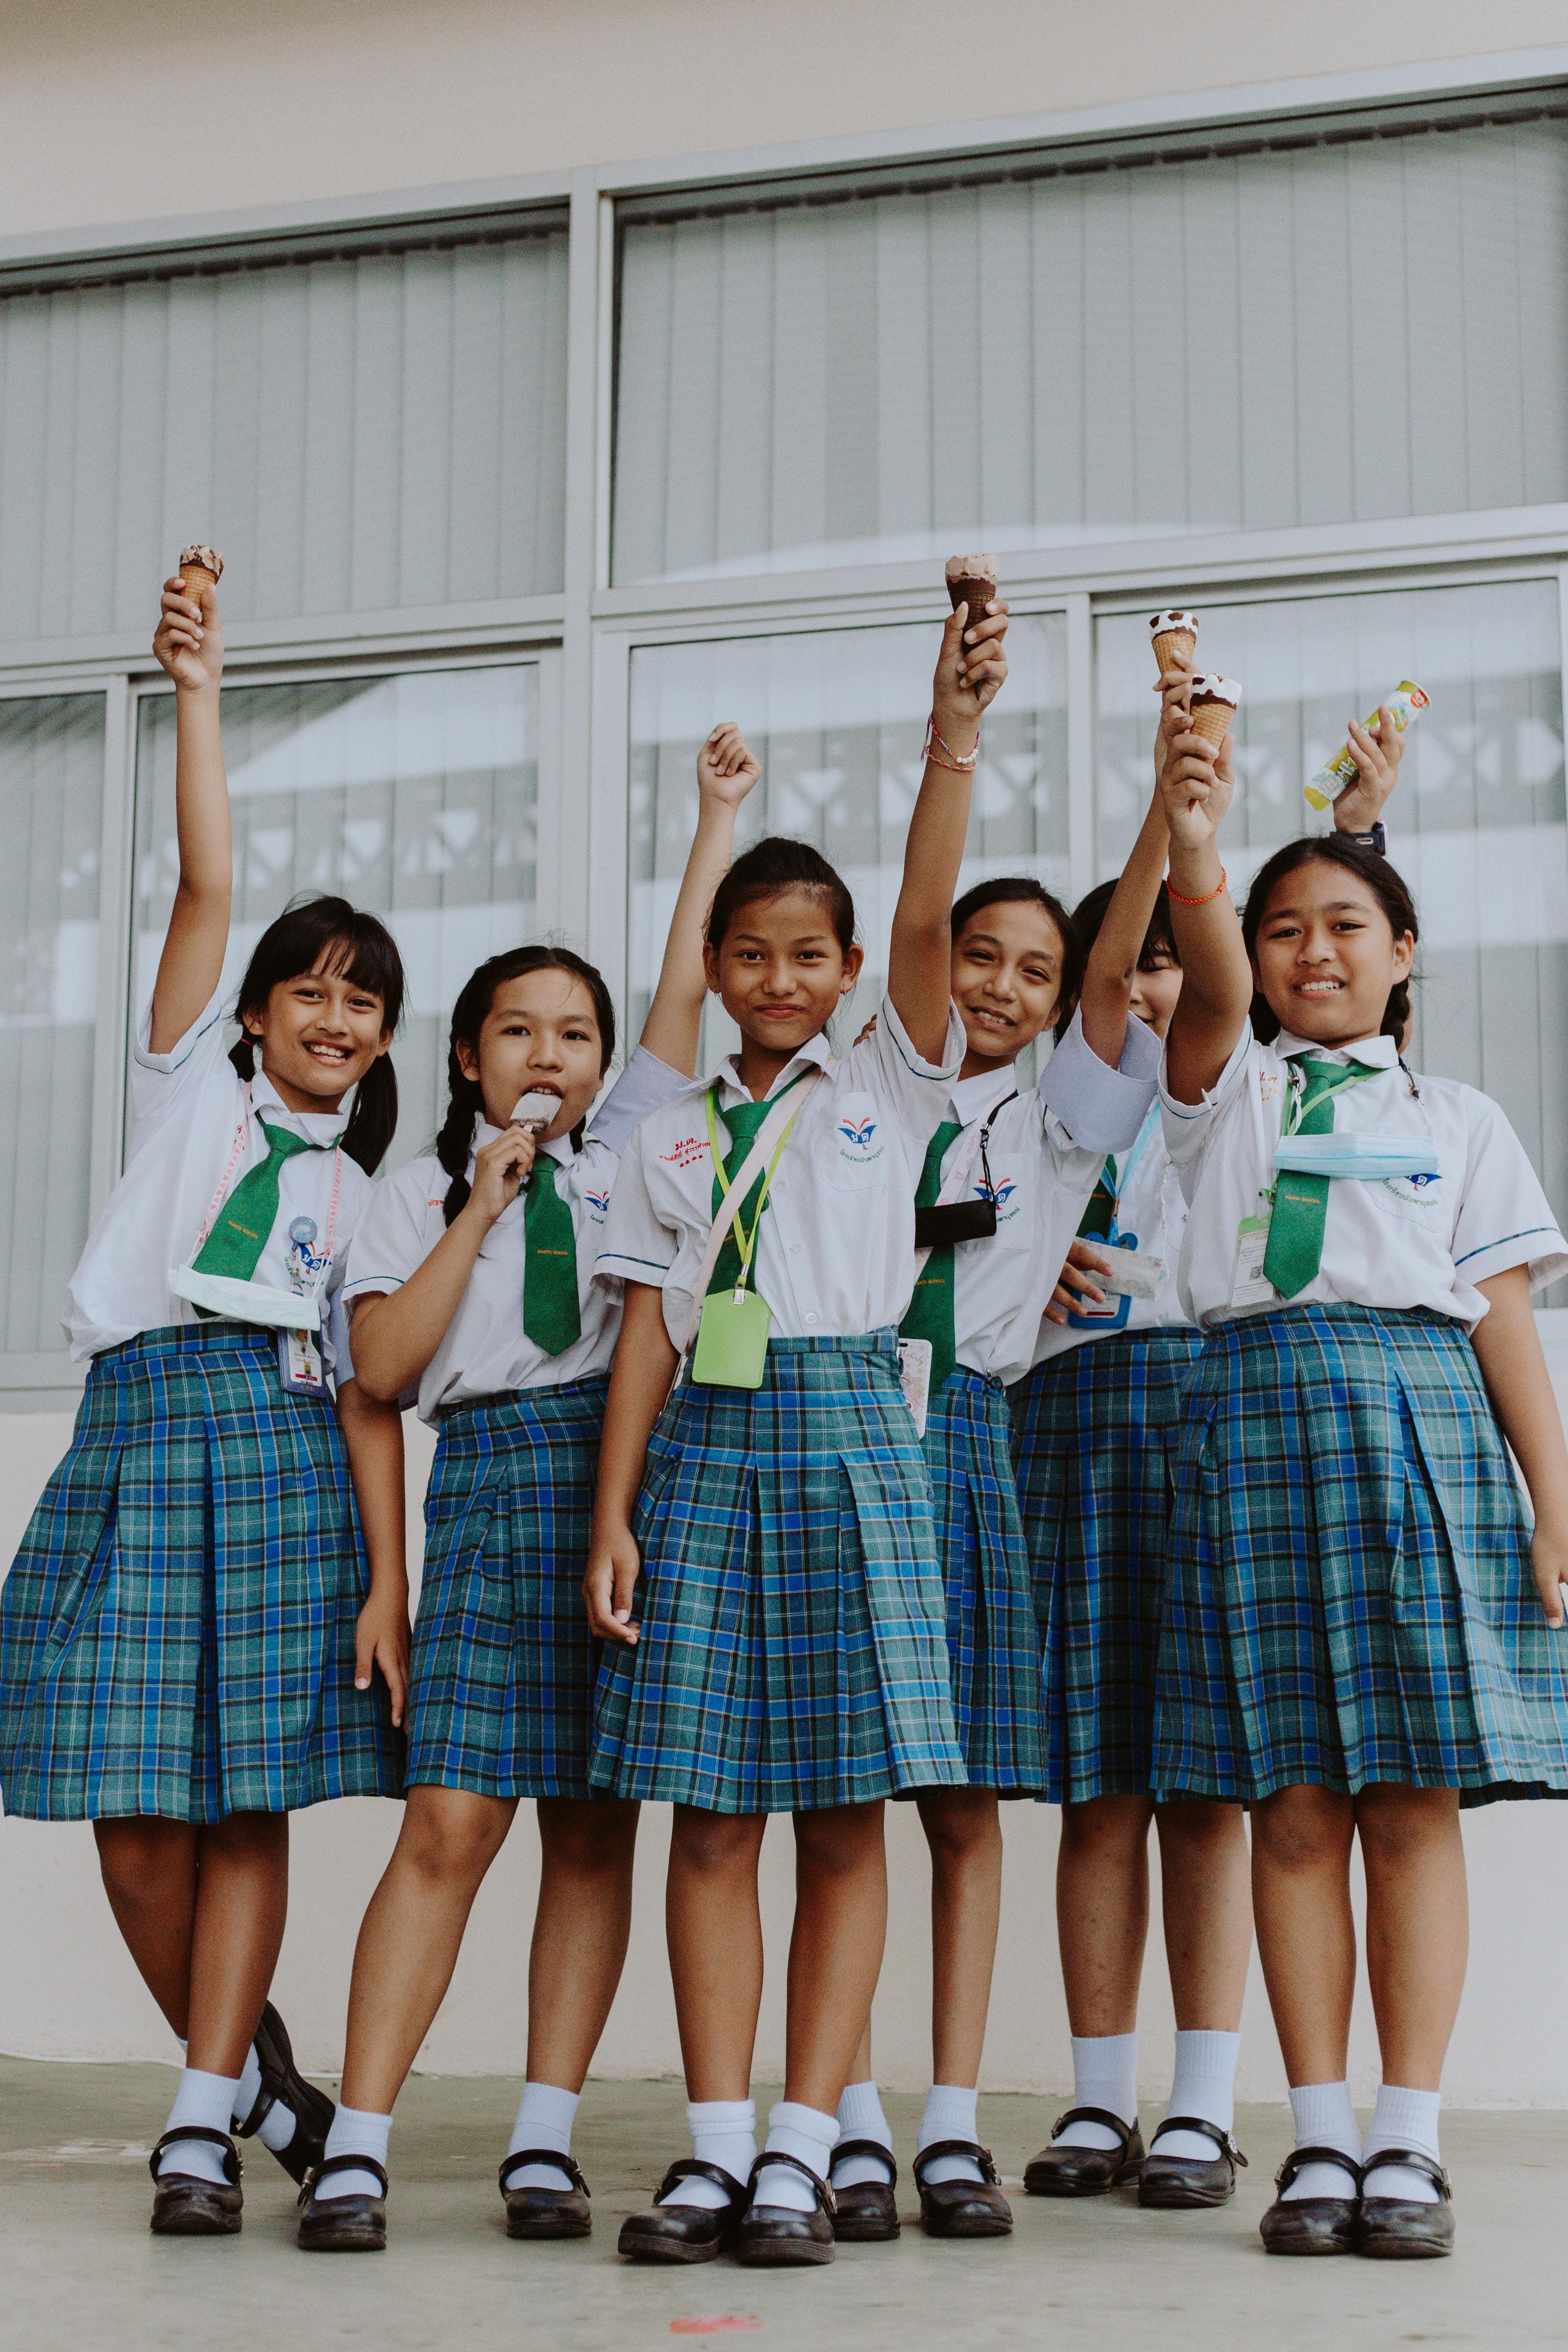 What are reasons why students should not wear uniforms? 